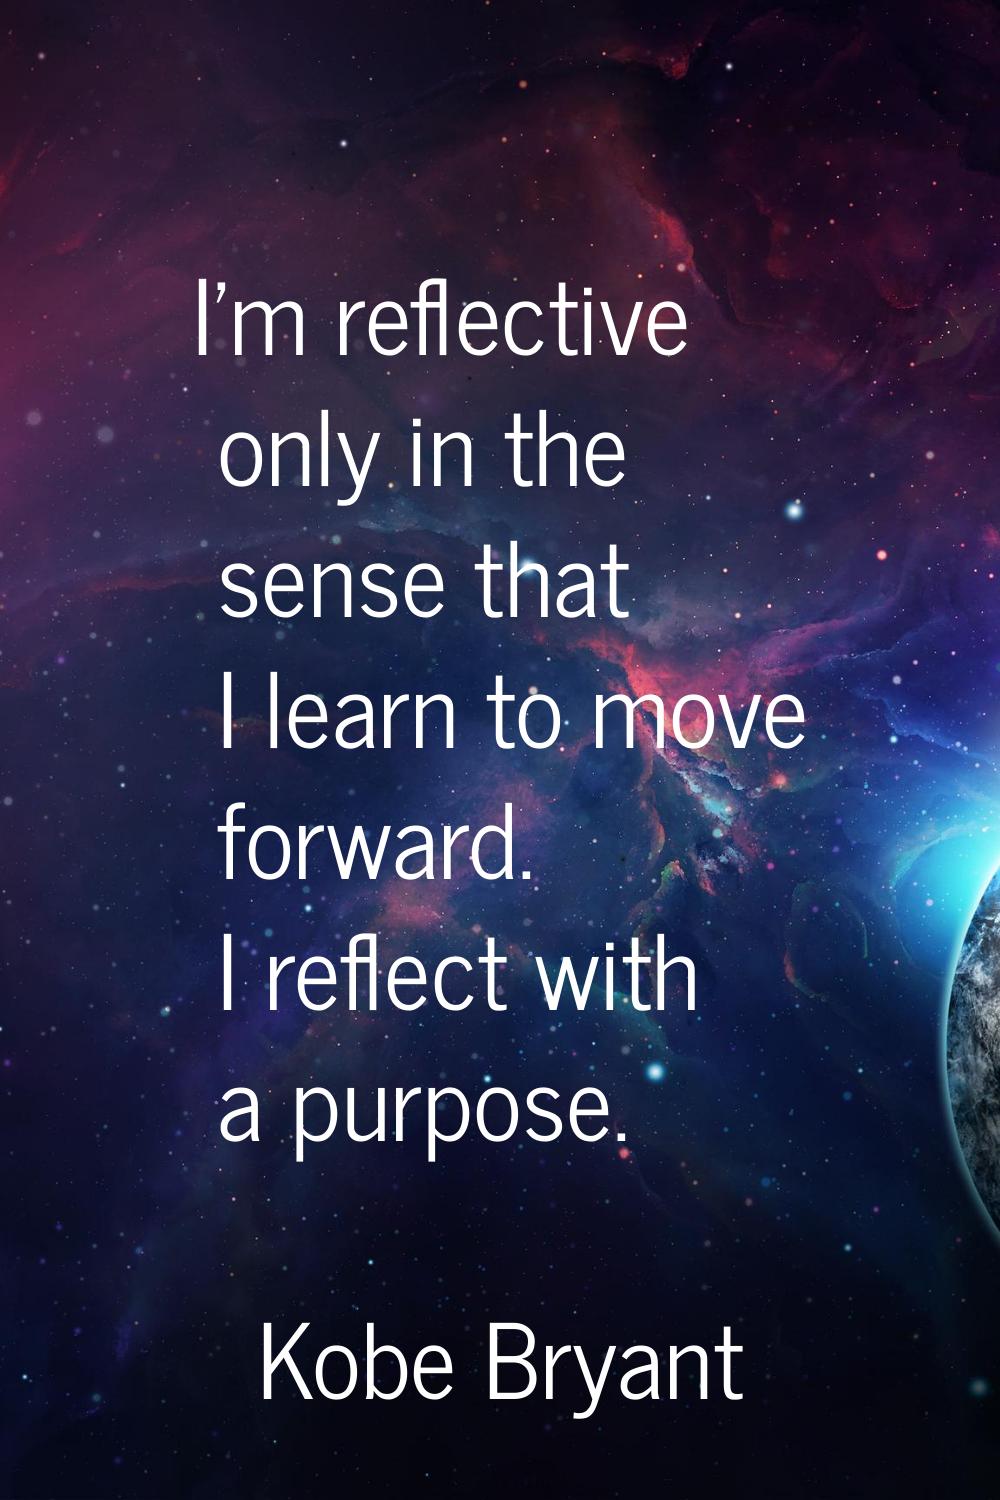 I'm reflective only in the sense that I learn to move forward. I reflect with a purpose.